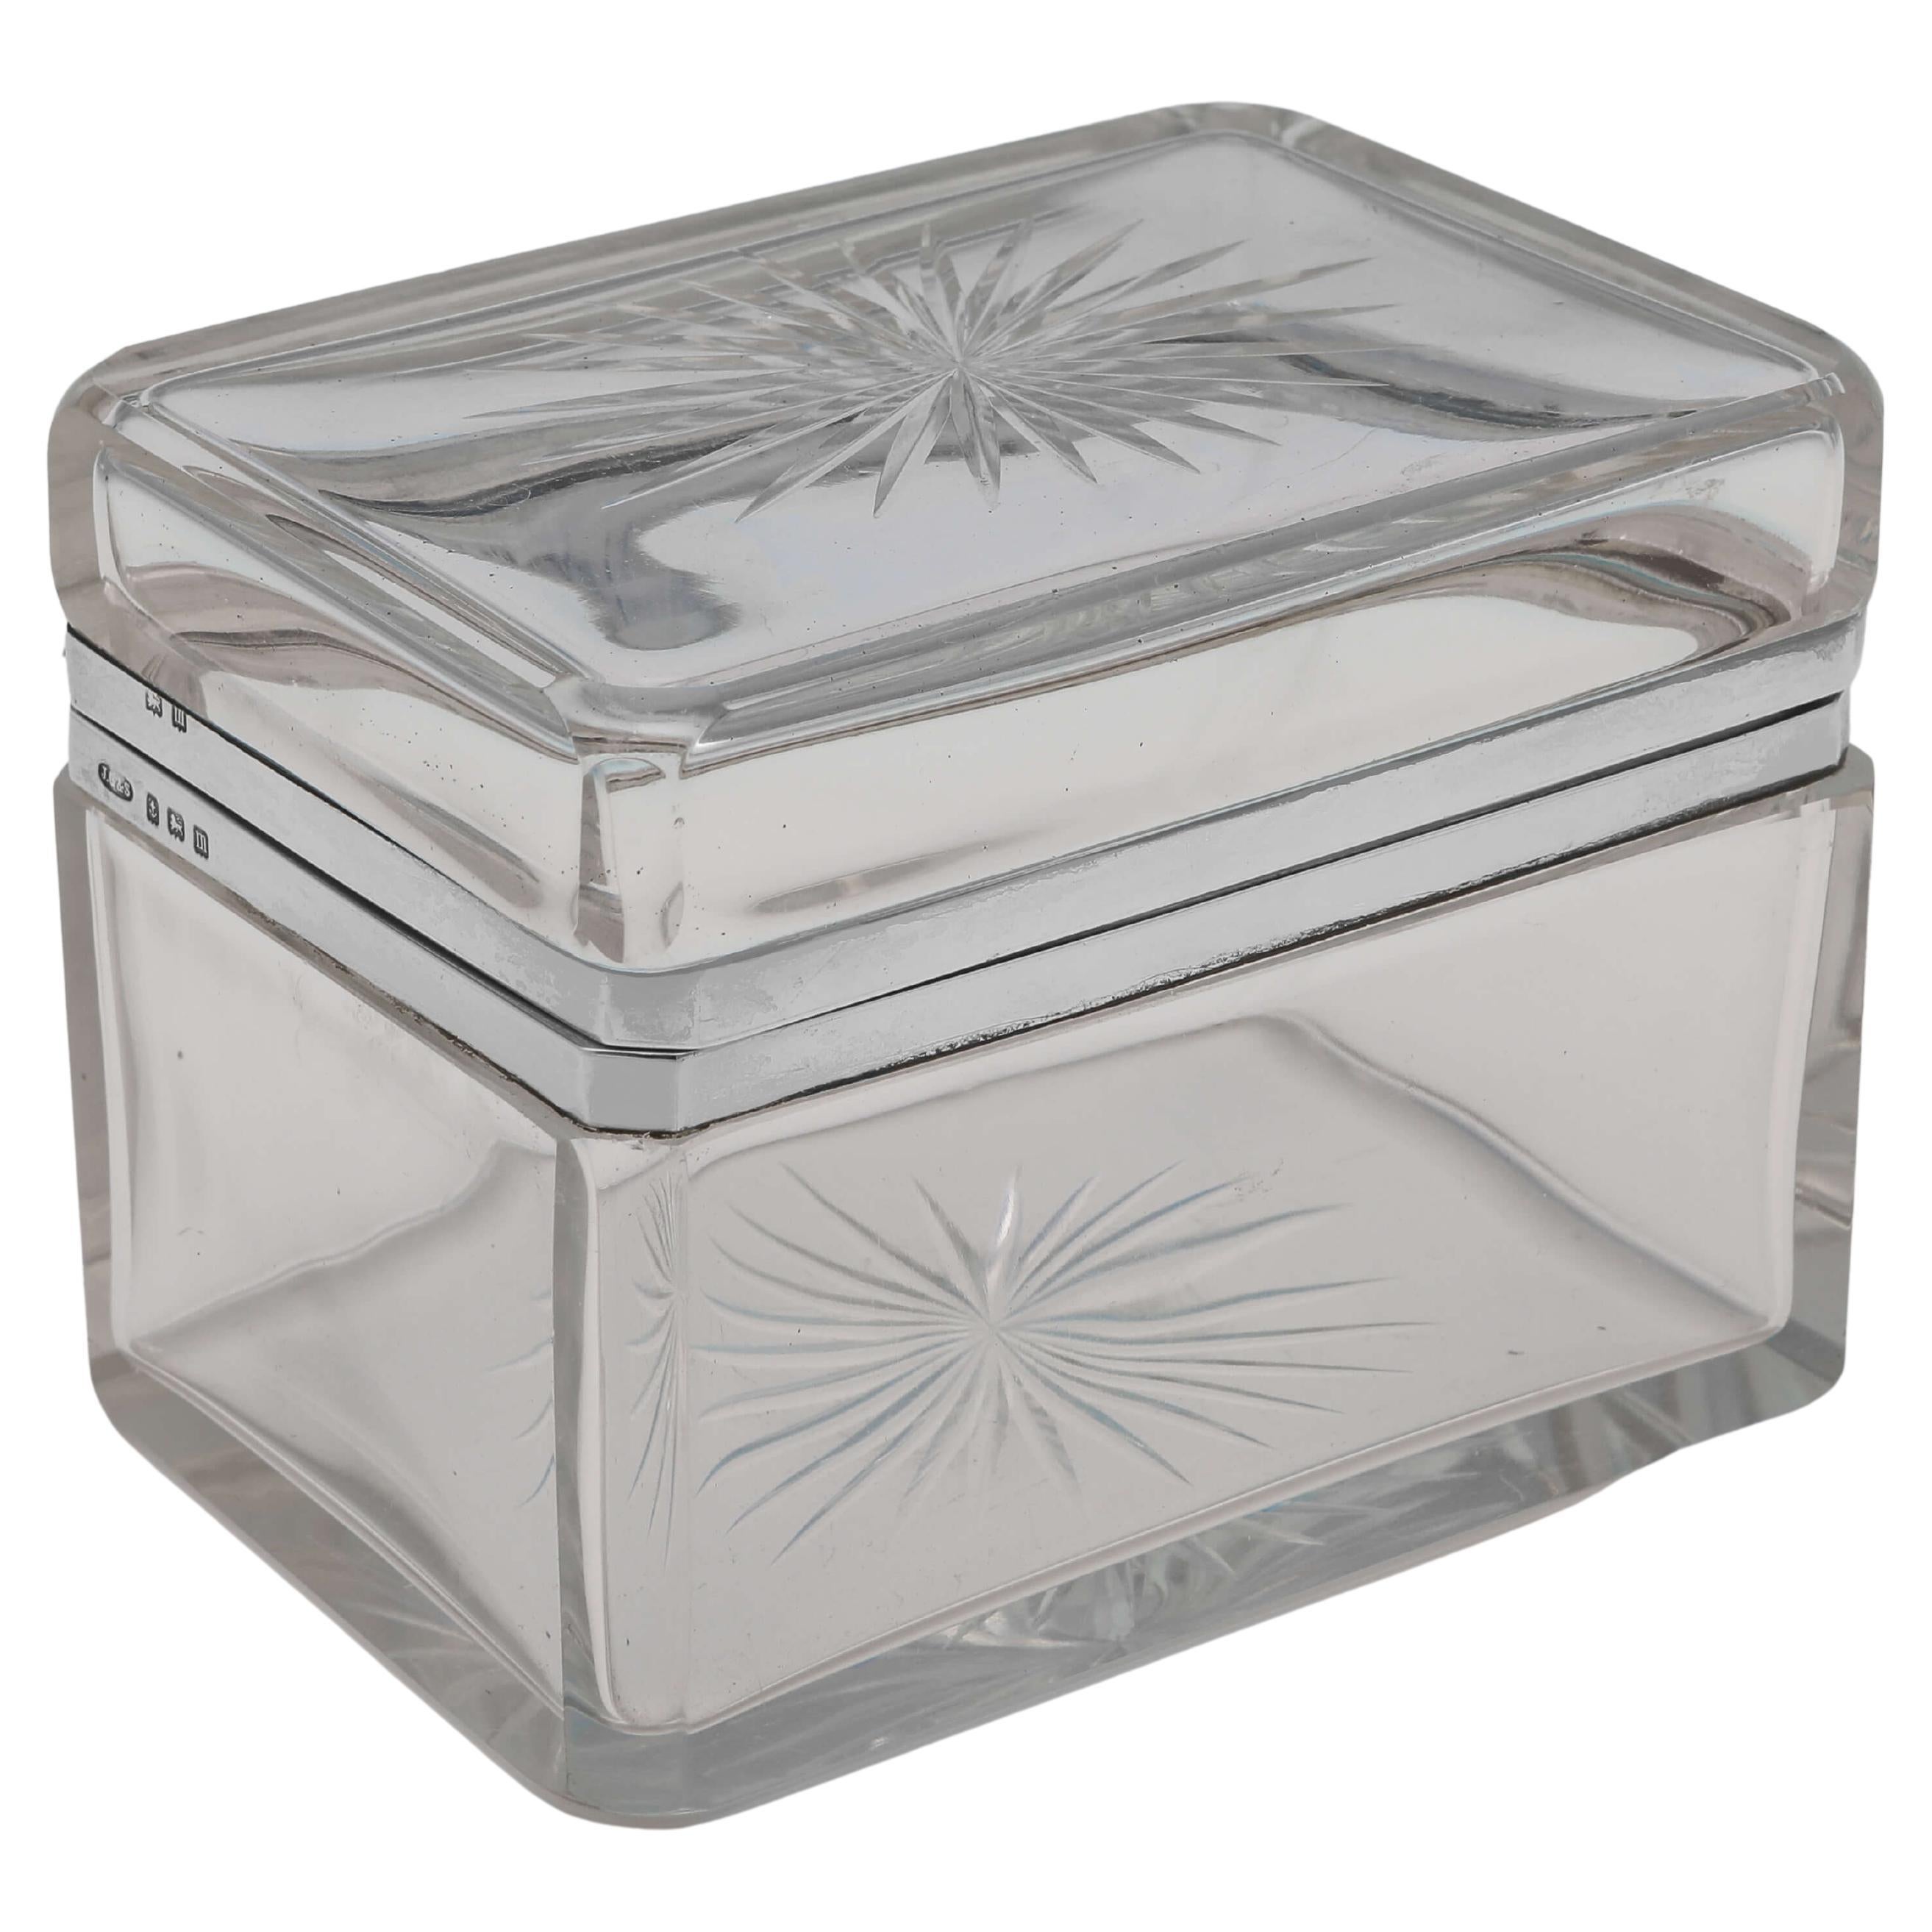 Stylish Sterling Silver Mounted Glass Table Box with Hinged Lid, Made in 1911